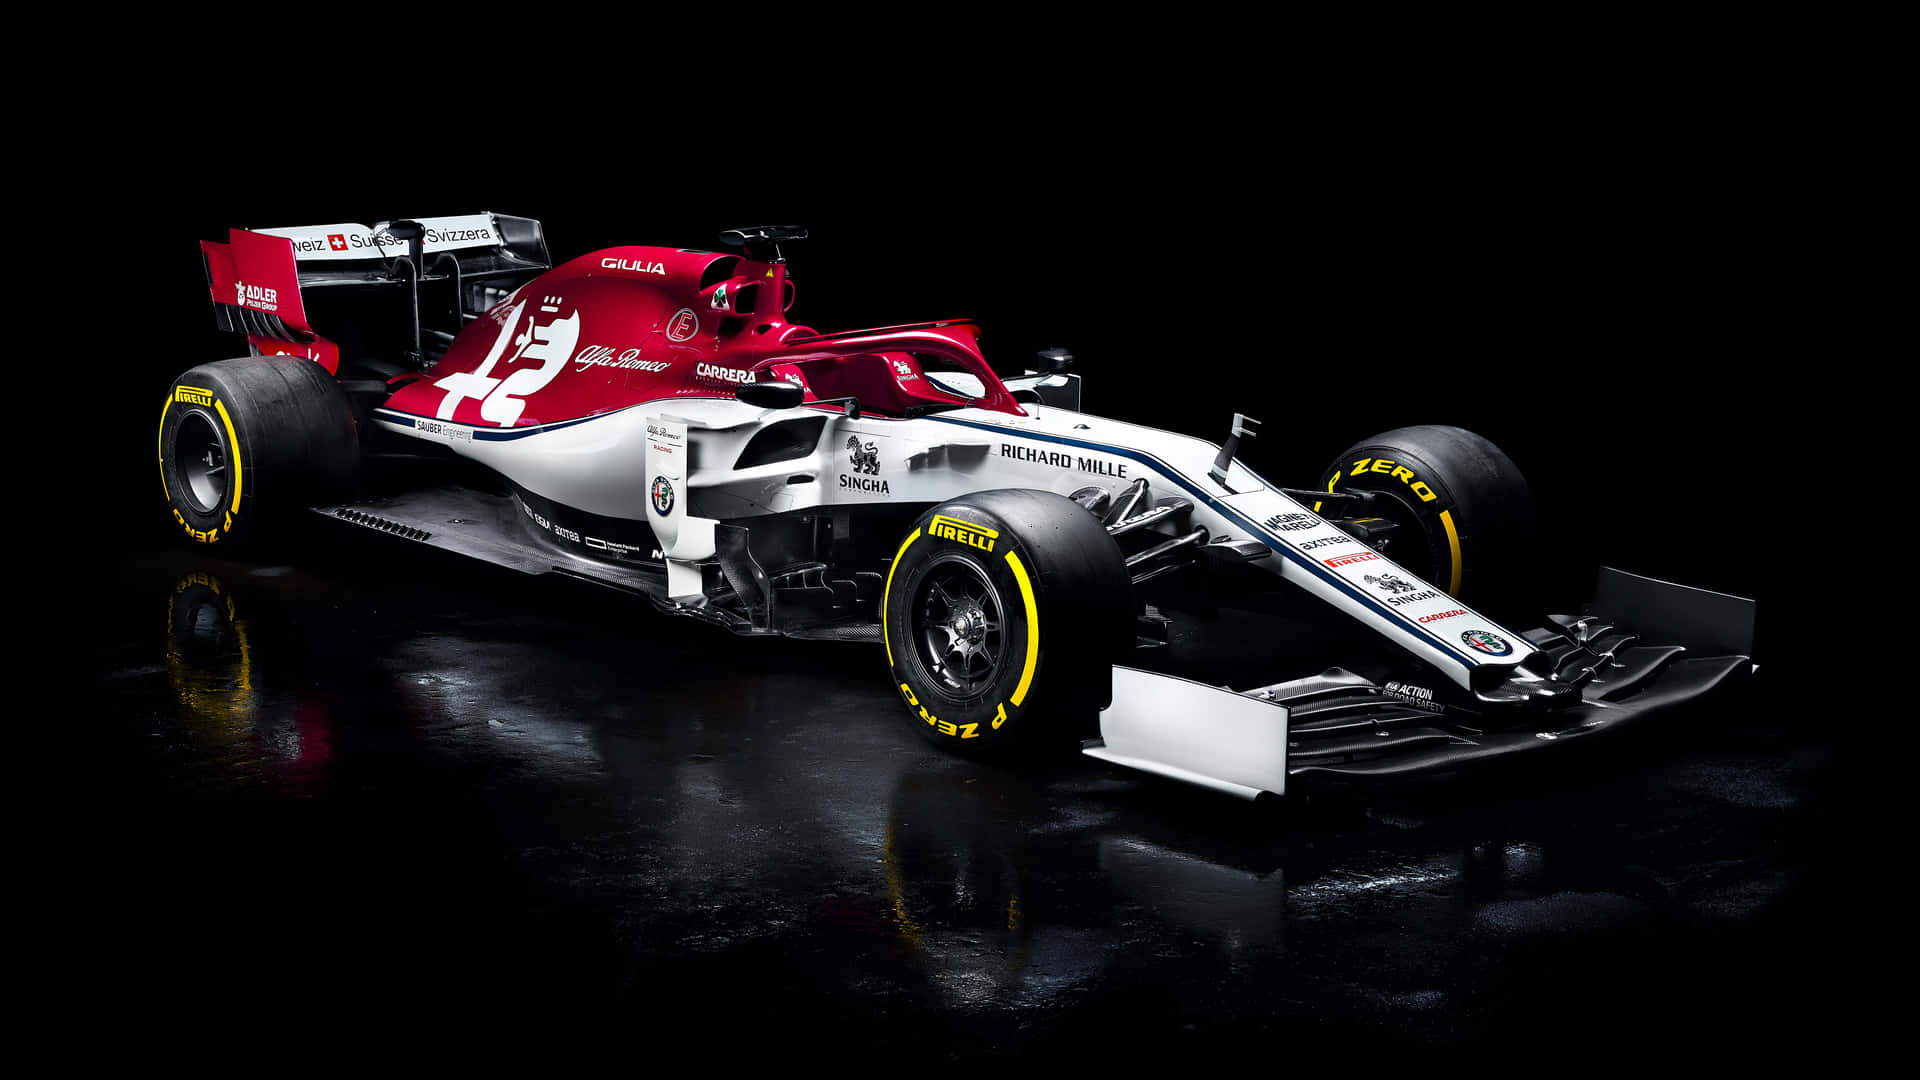 A Red And White Racing Car On A Black Background